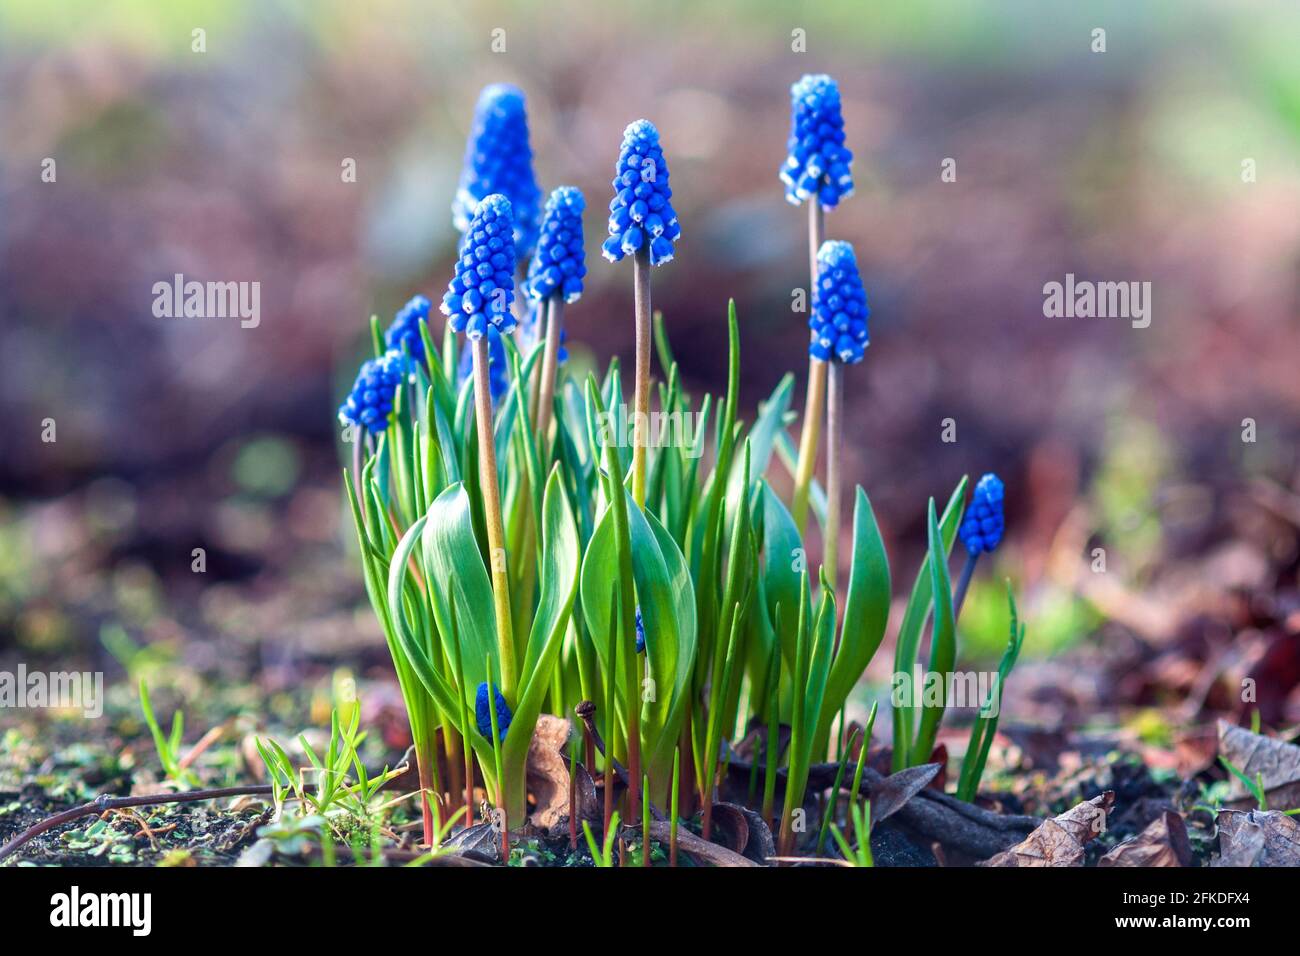 Grape hyacinth flowering - Muscari botryoides plant blooming with blue flowers in spring garden Stock Photo